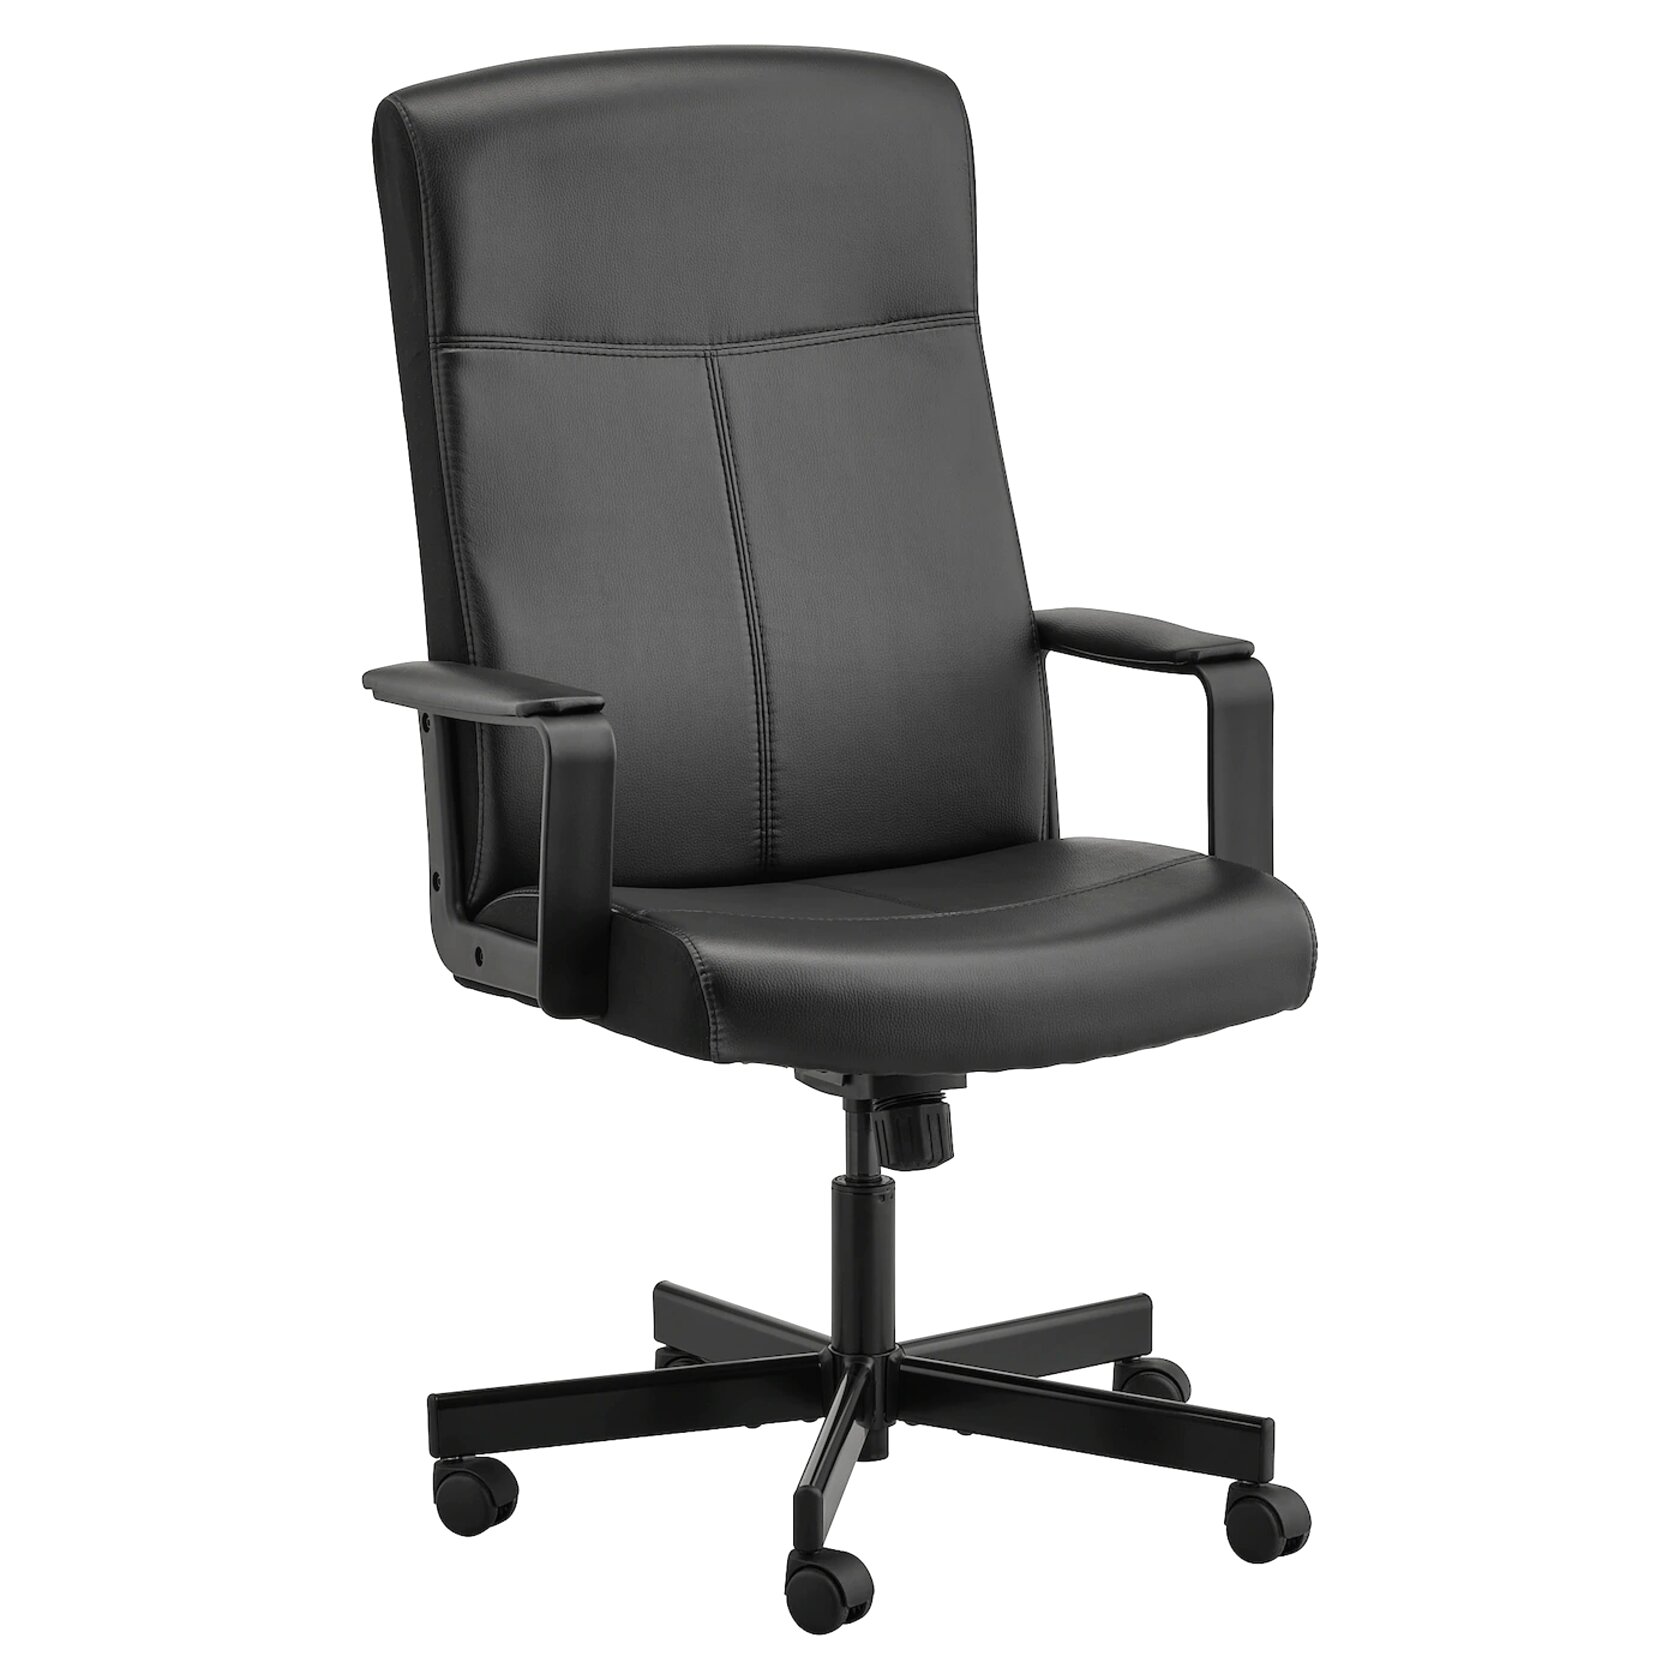 New Computer Chair For Sale Near Me 